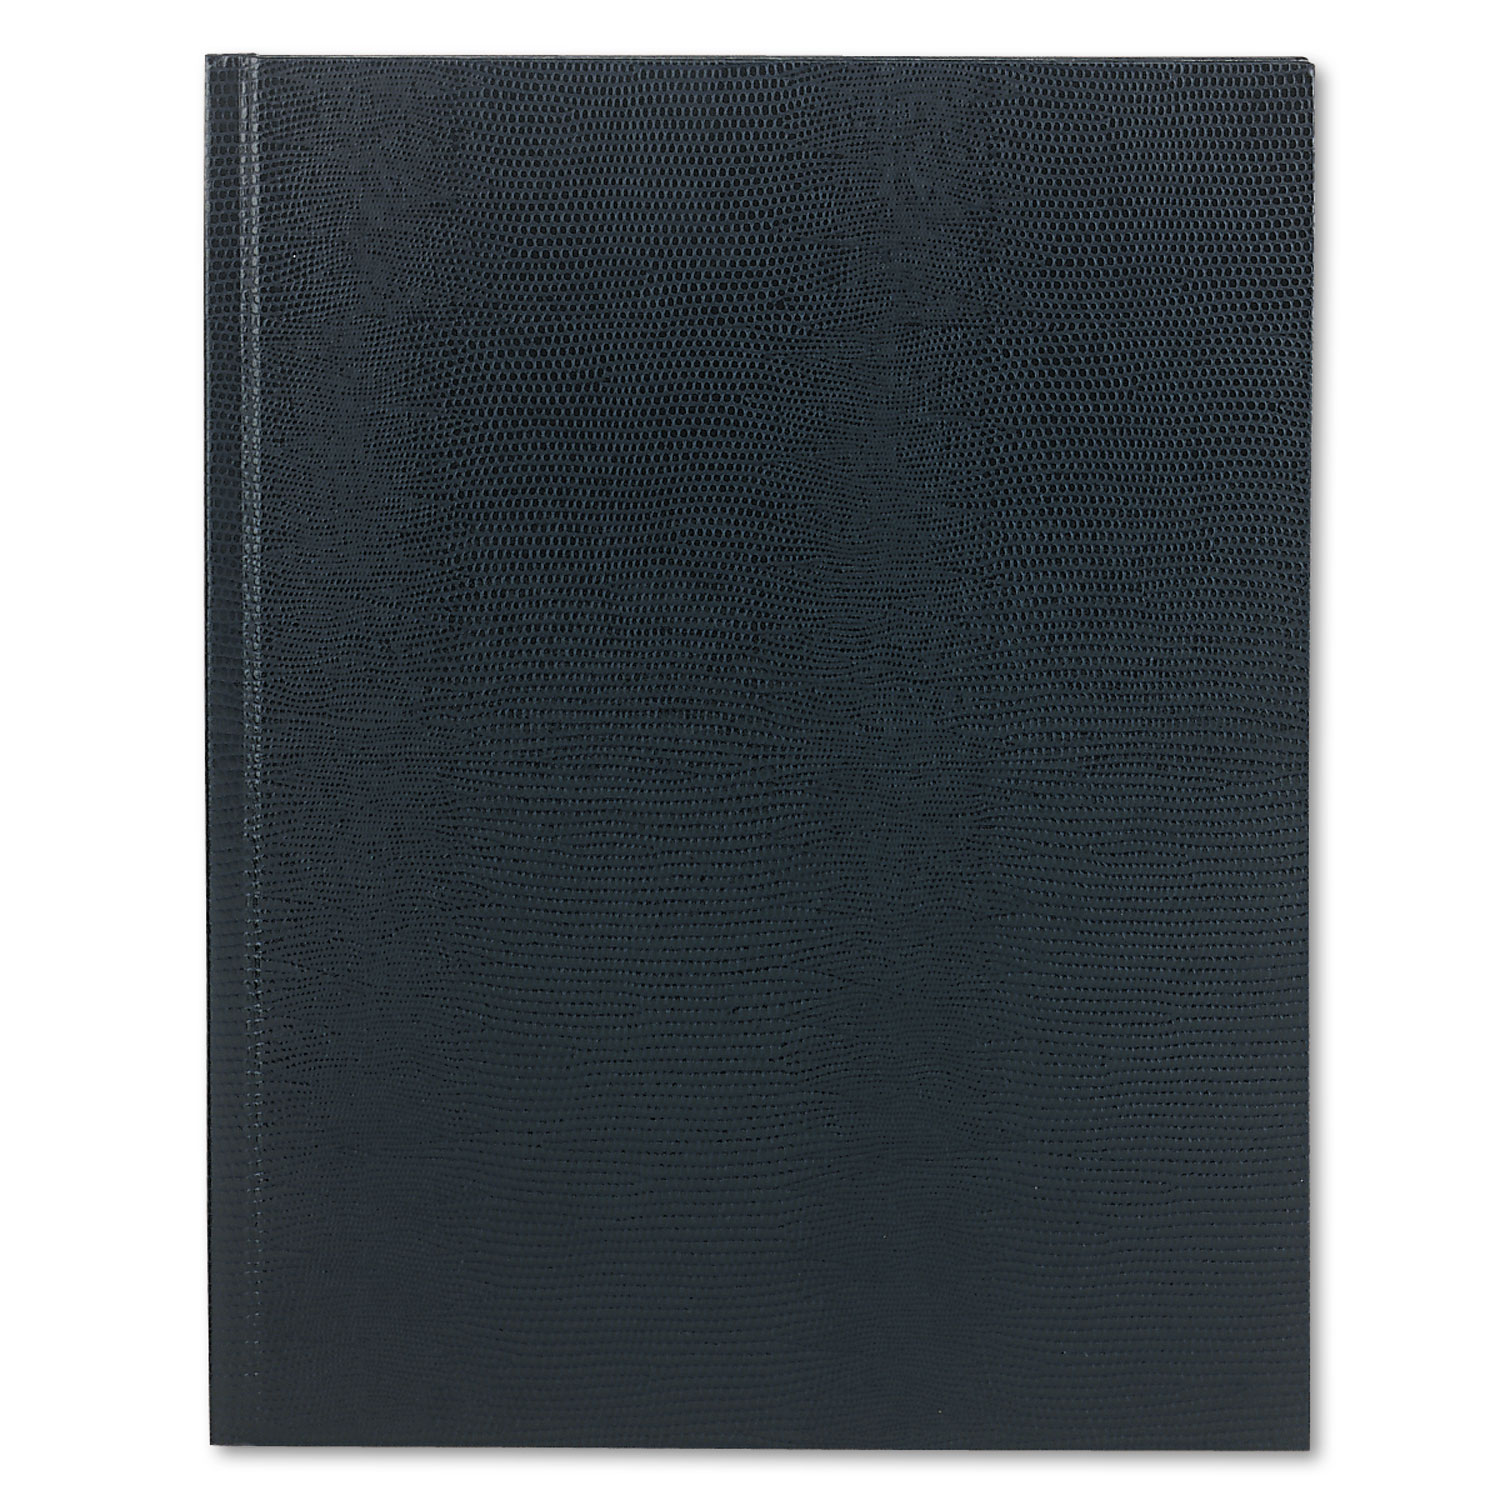  Blueline A10.82 Executive Notebook, Medium/College Rule, Blue Cover, 10 3/4 x 8 1/2, 75 Sheets (REDA1082) 